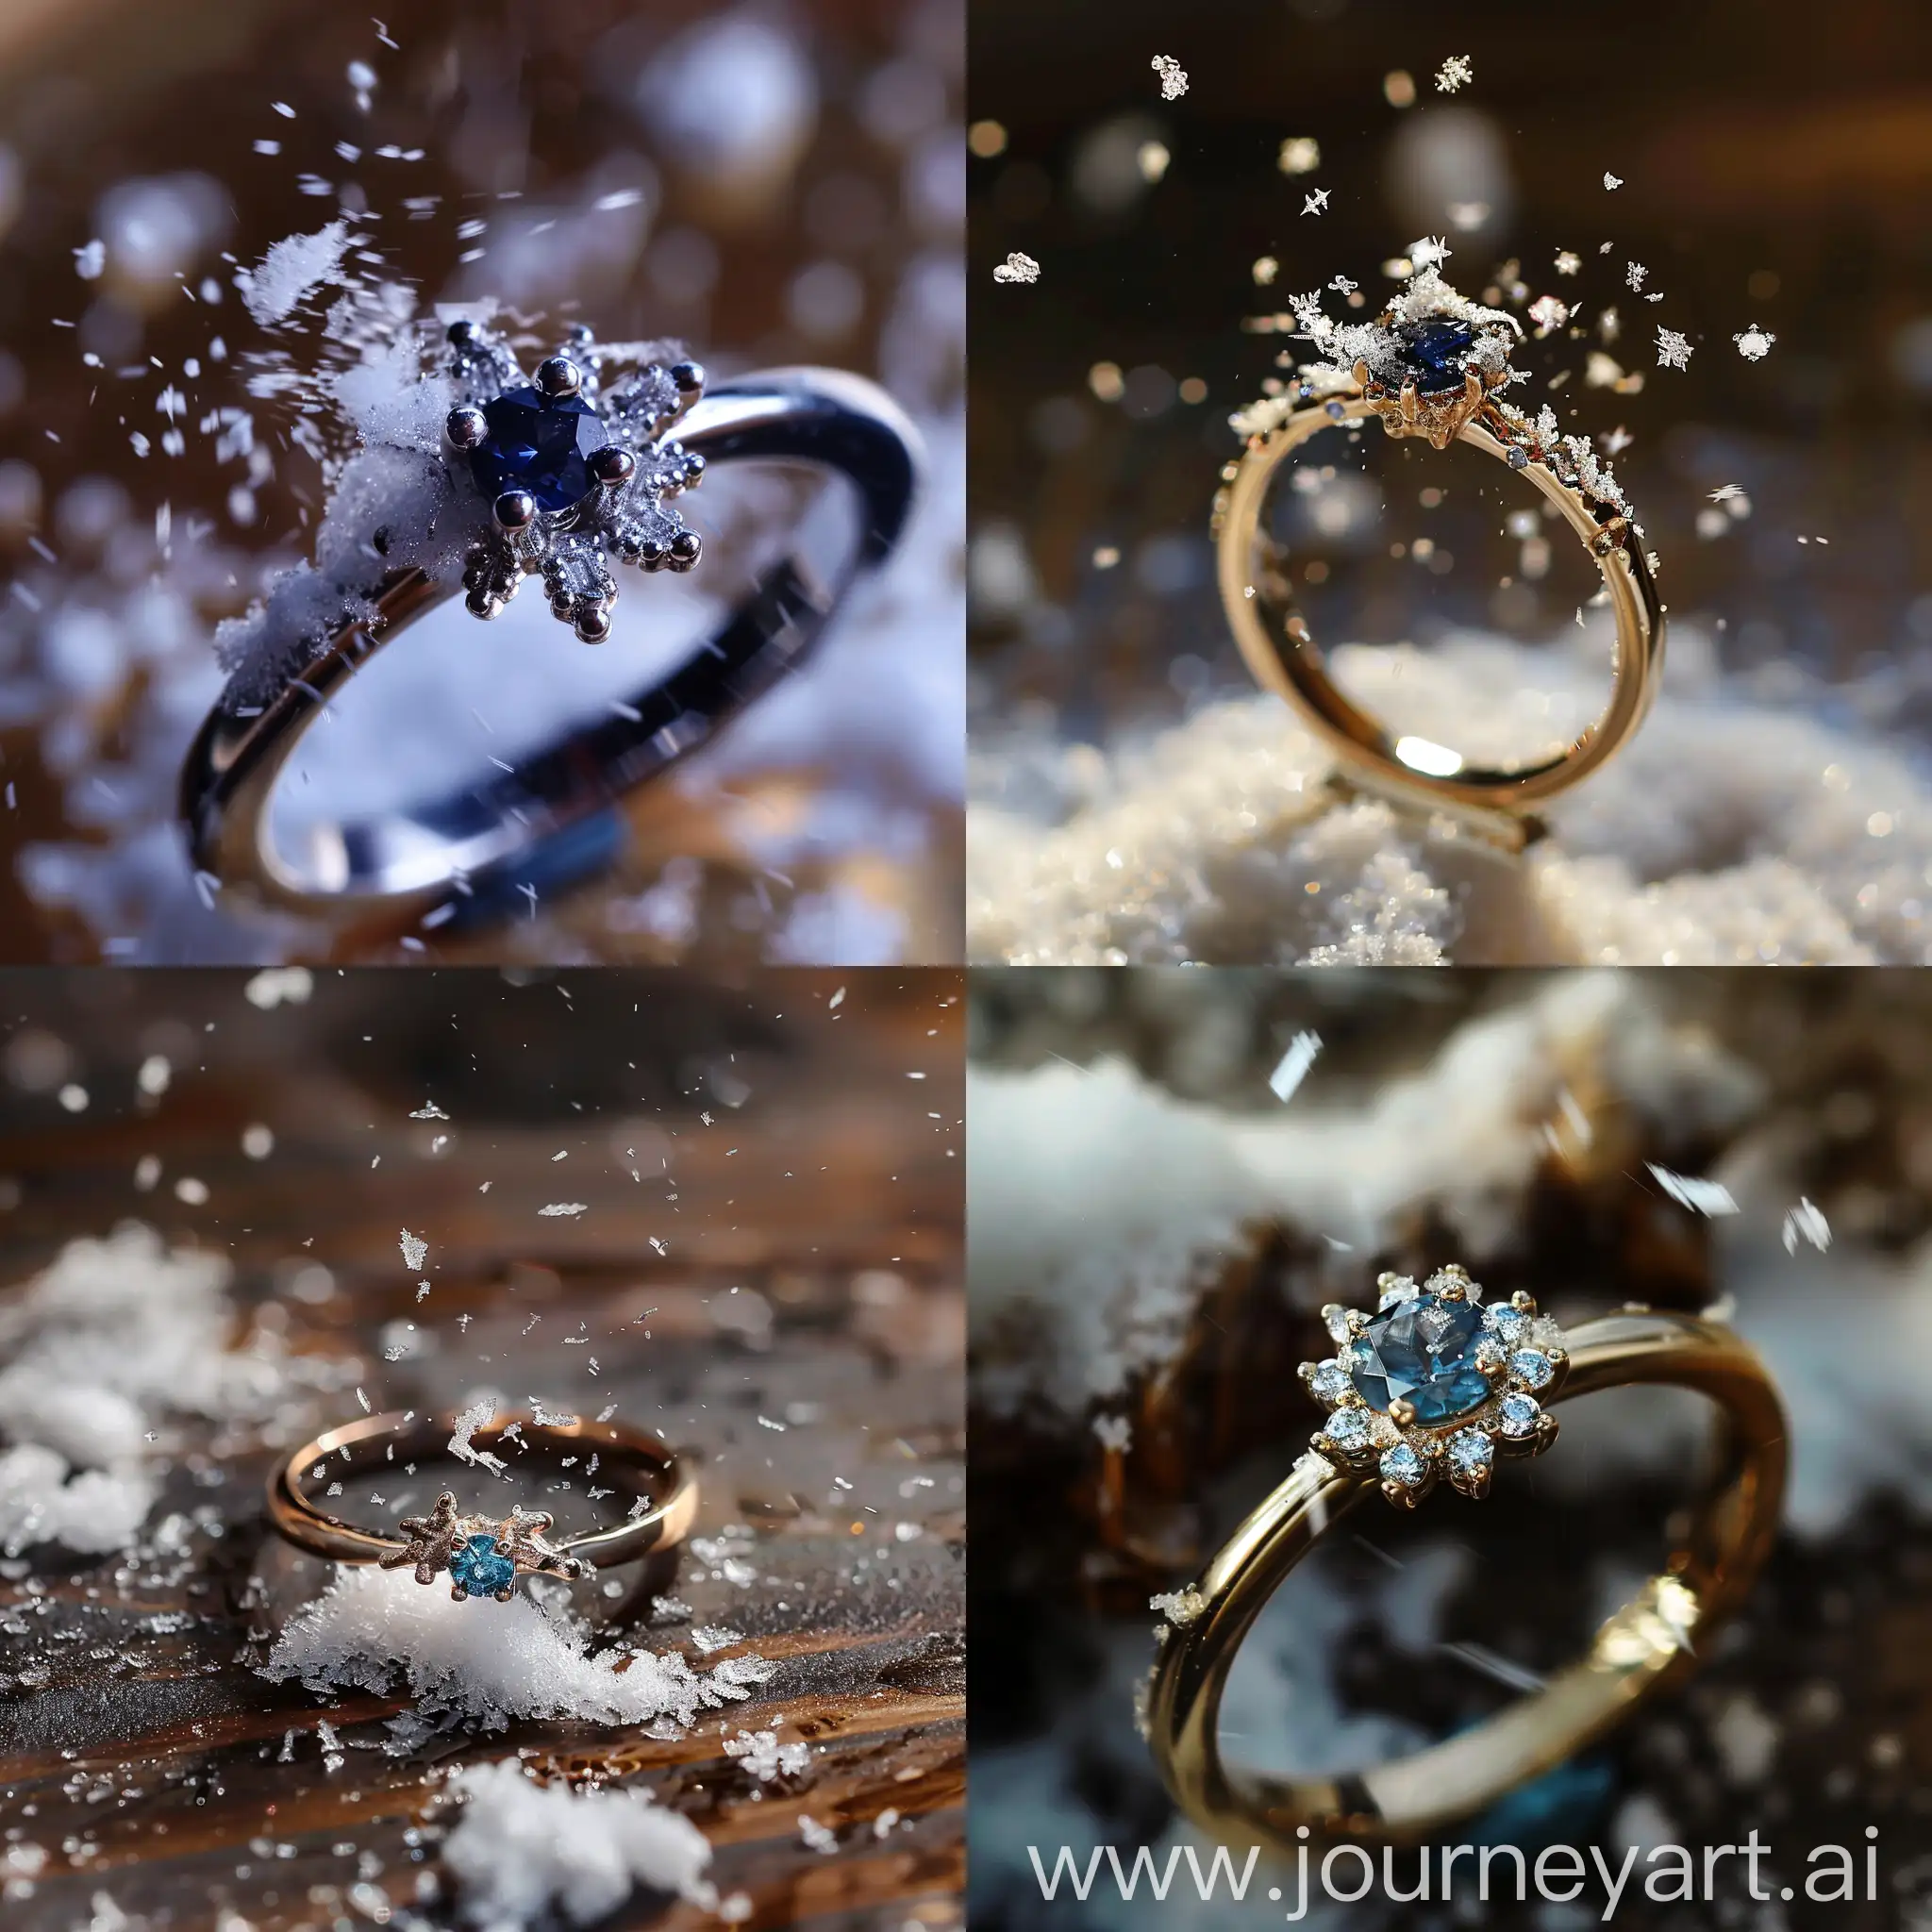 Snowflake-Ring-with-Blue-Stone-Whimsical-Jewelry-Photography